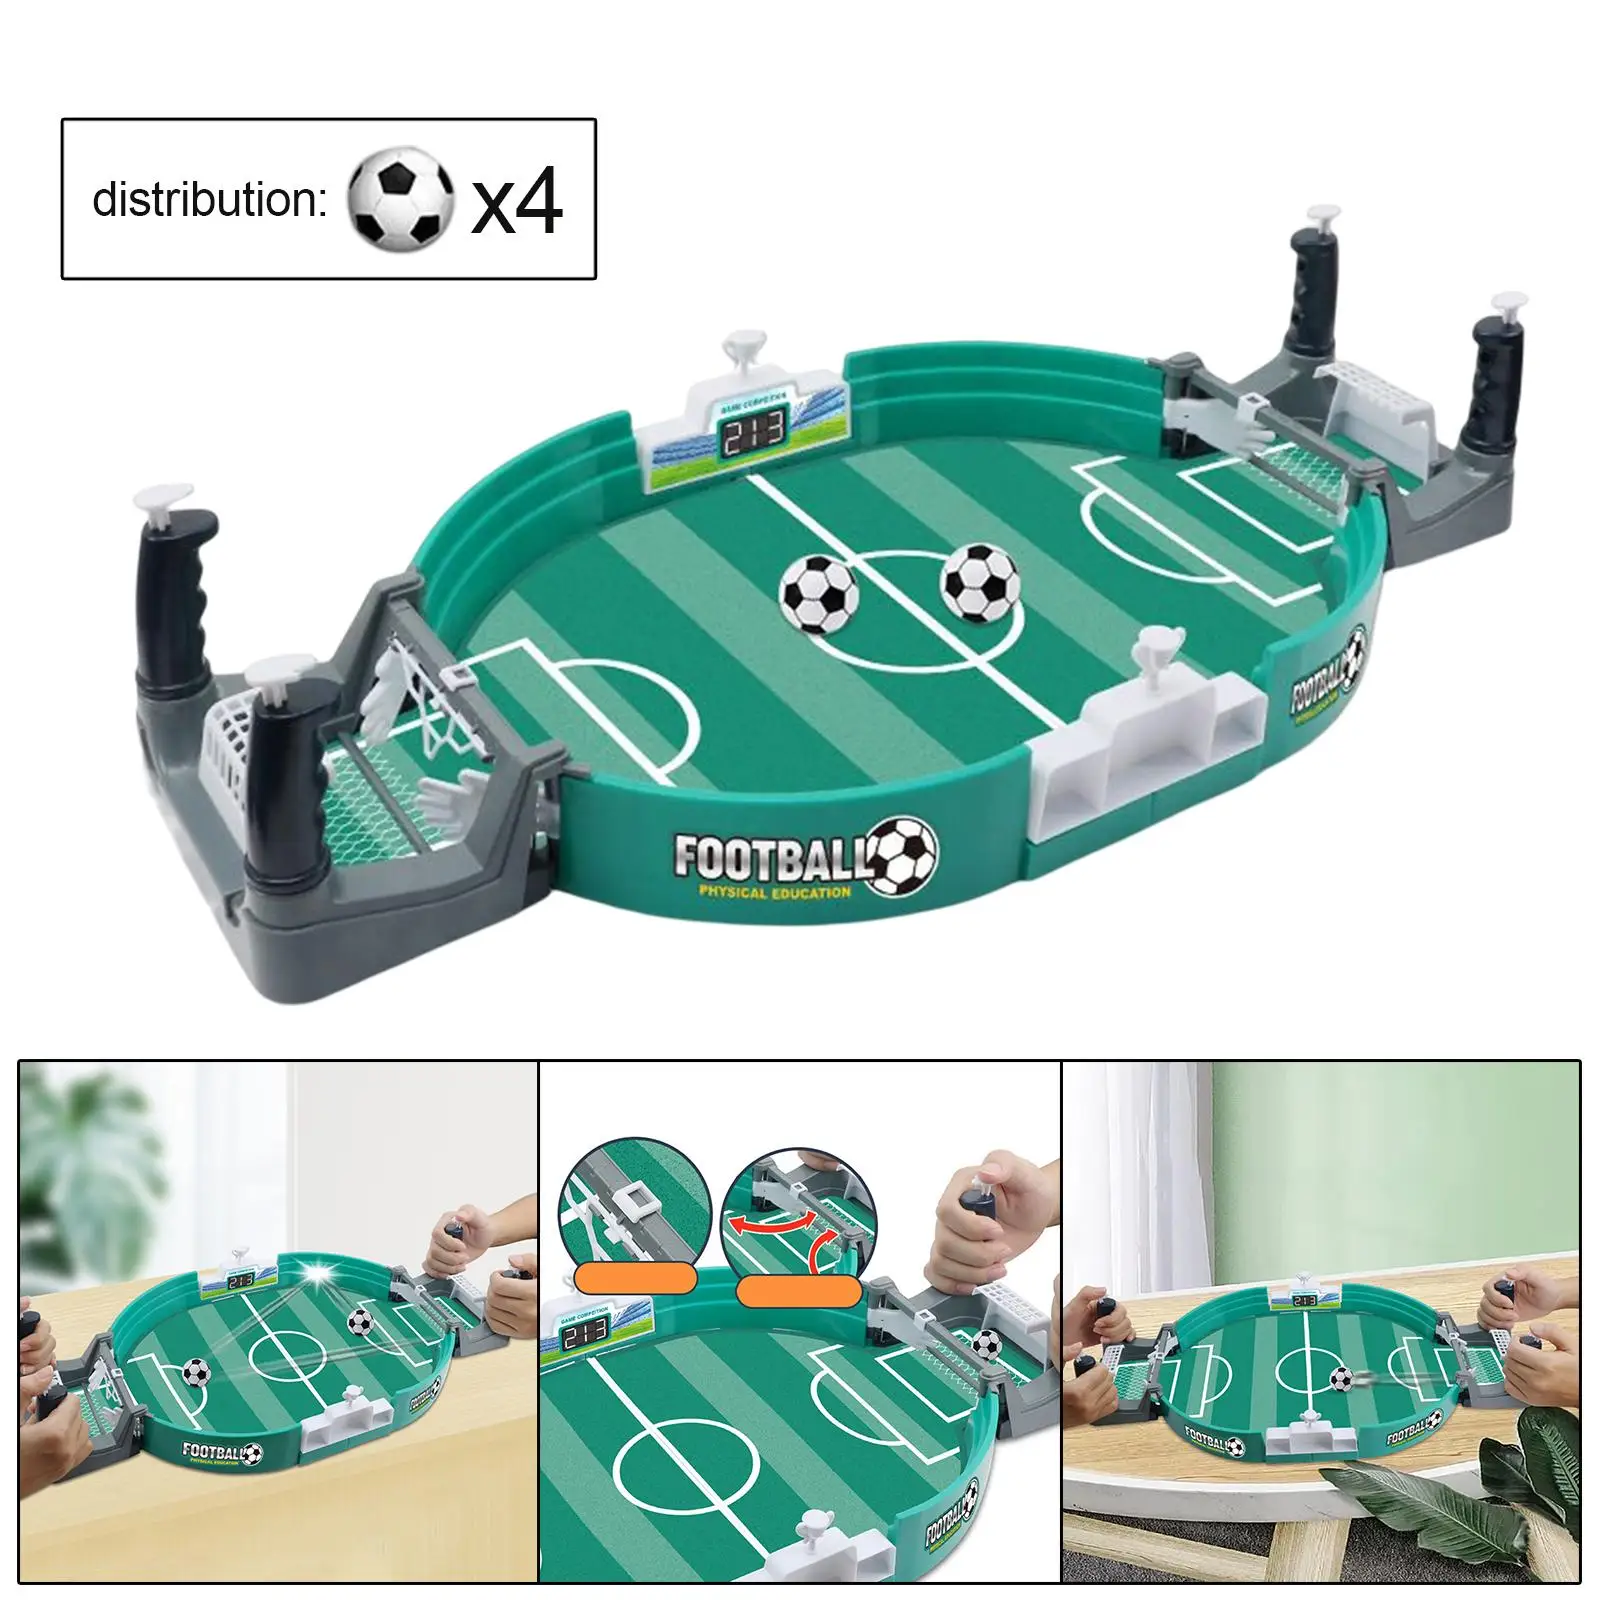 Soccertop Game Interactive Toy Sport Game Tabletop Play Ball Soccer Toys Football Board Game for Family Party Entertainment